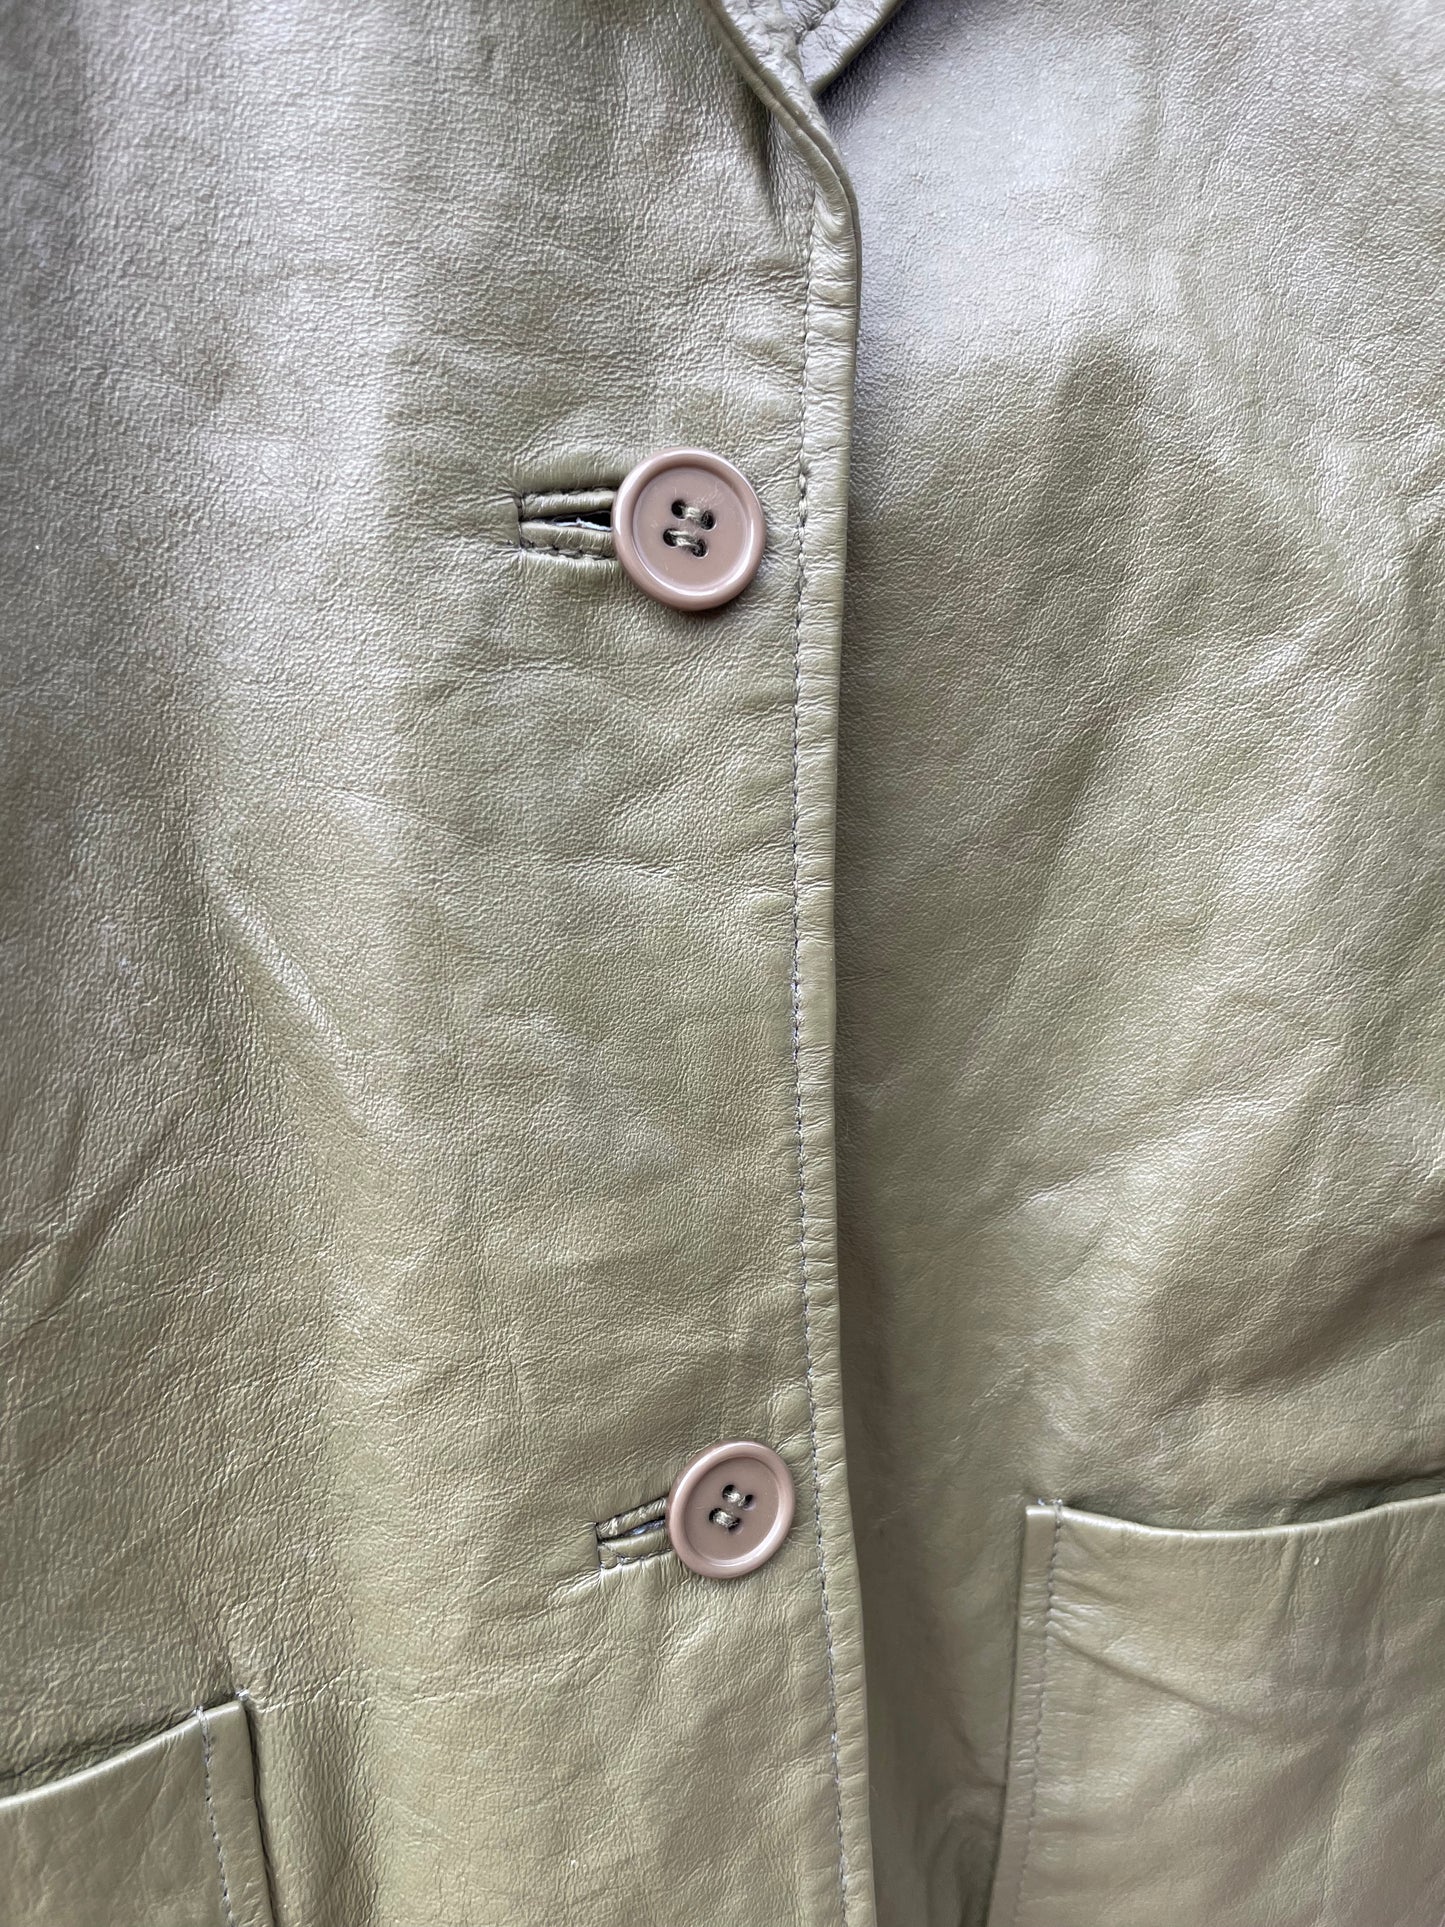 PORTER Green Leather Jacket by MetroStyle tag size L